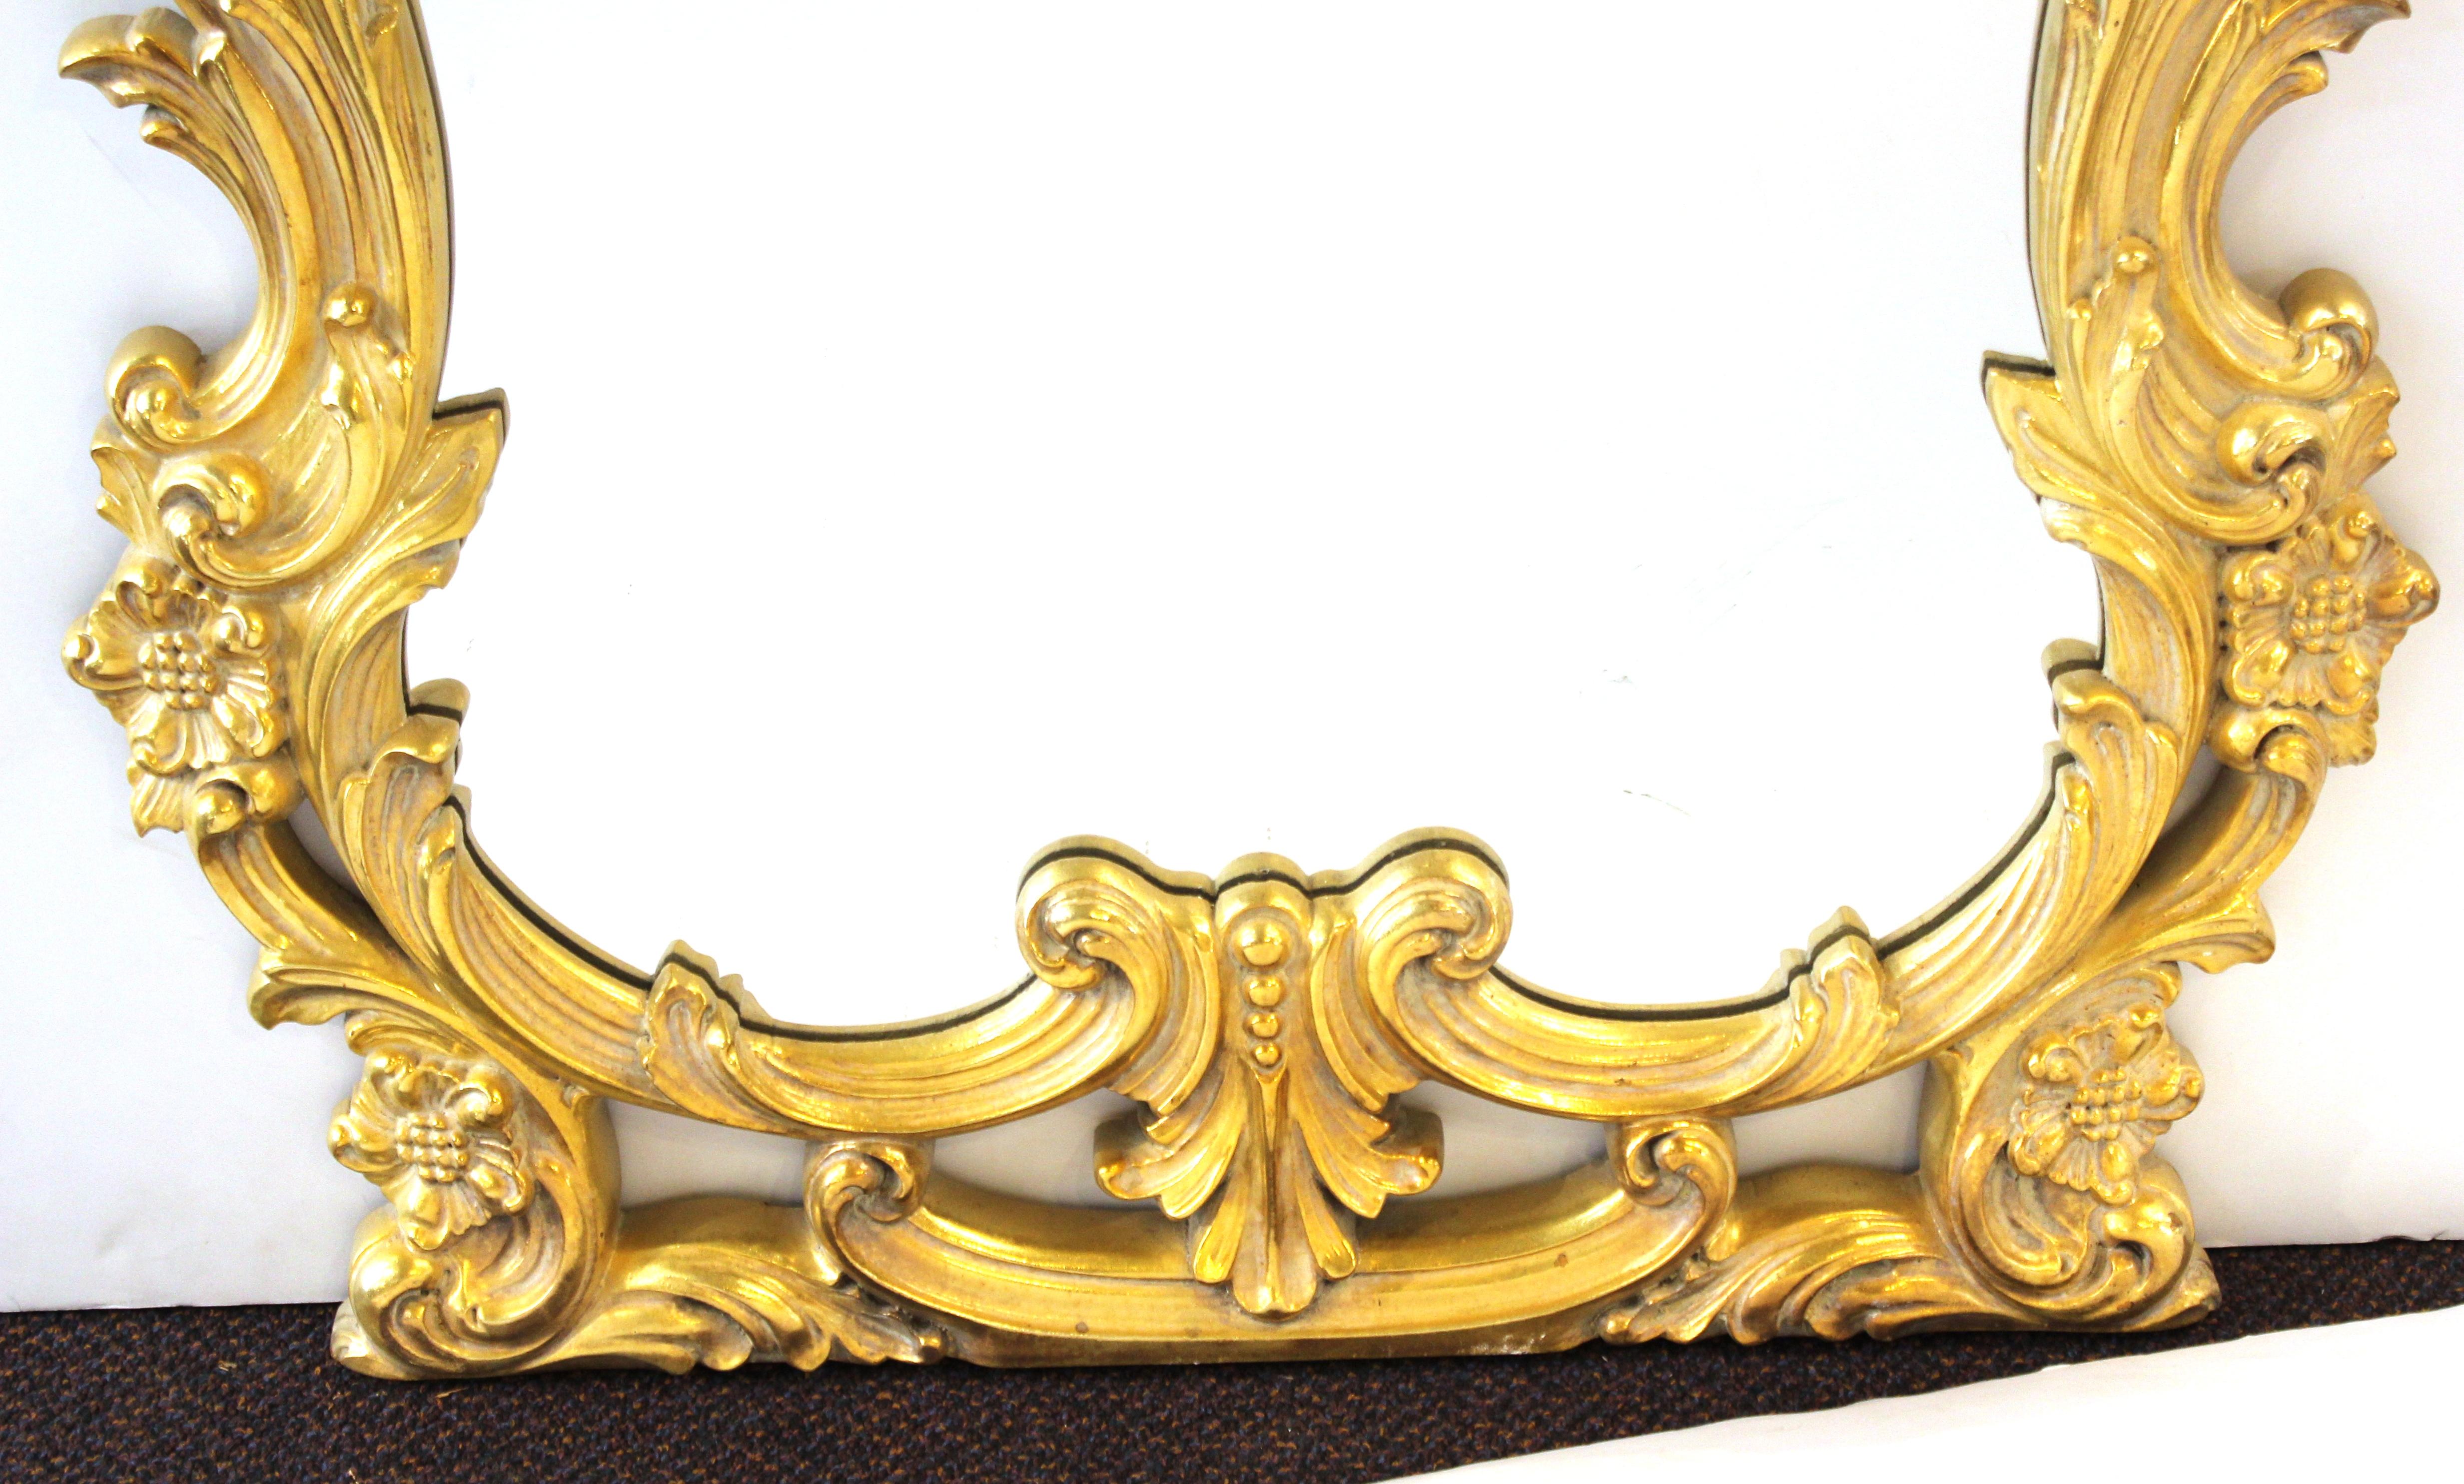 Hollywood Regency Baroque revival style wall mirror with elaborate gold frame. The piece was made in the late 20th century and is in great vintage condition with age-appropriate wear.